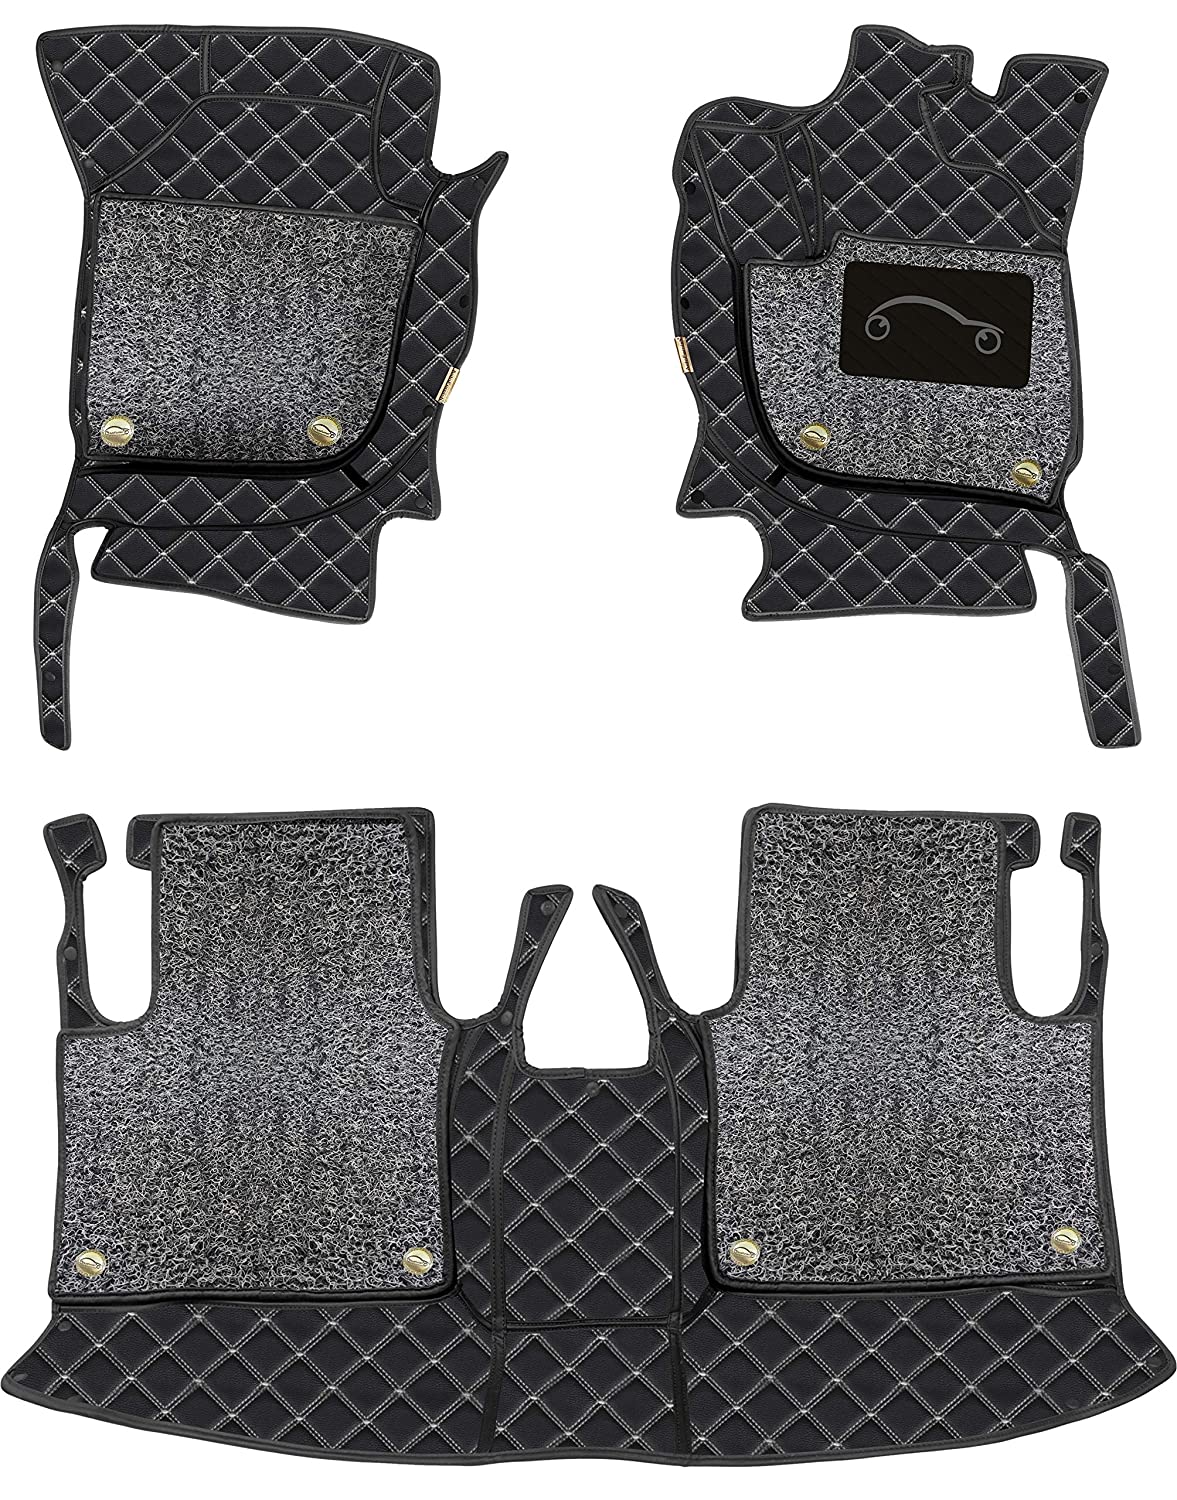 Mercedes GLE 43 AMG 2018-20-7D Luxury Car Mat, All Weather Proof, Anti-Skid, 100% Waterproof & Odorless with Unique Diamond Fish Design (24mm Luxury PU Leather, 2 Rows)